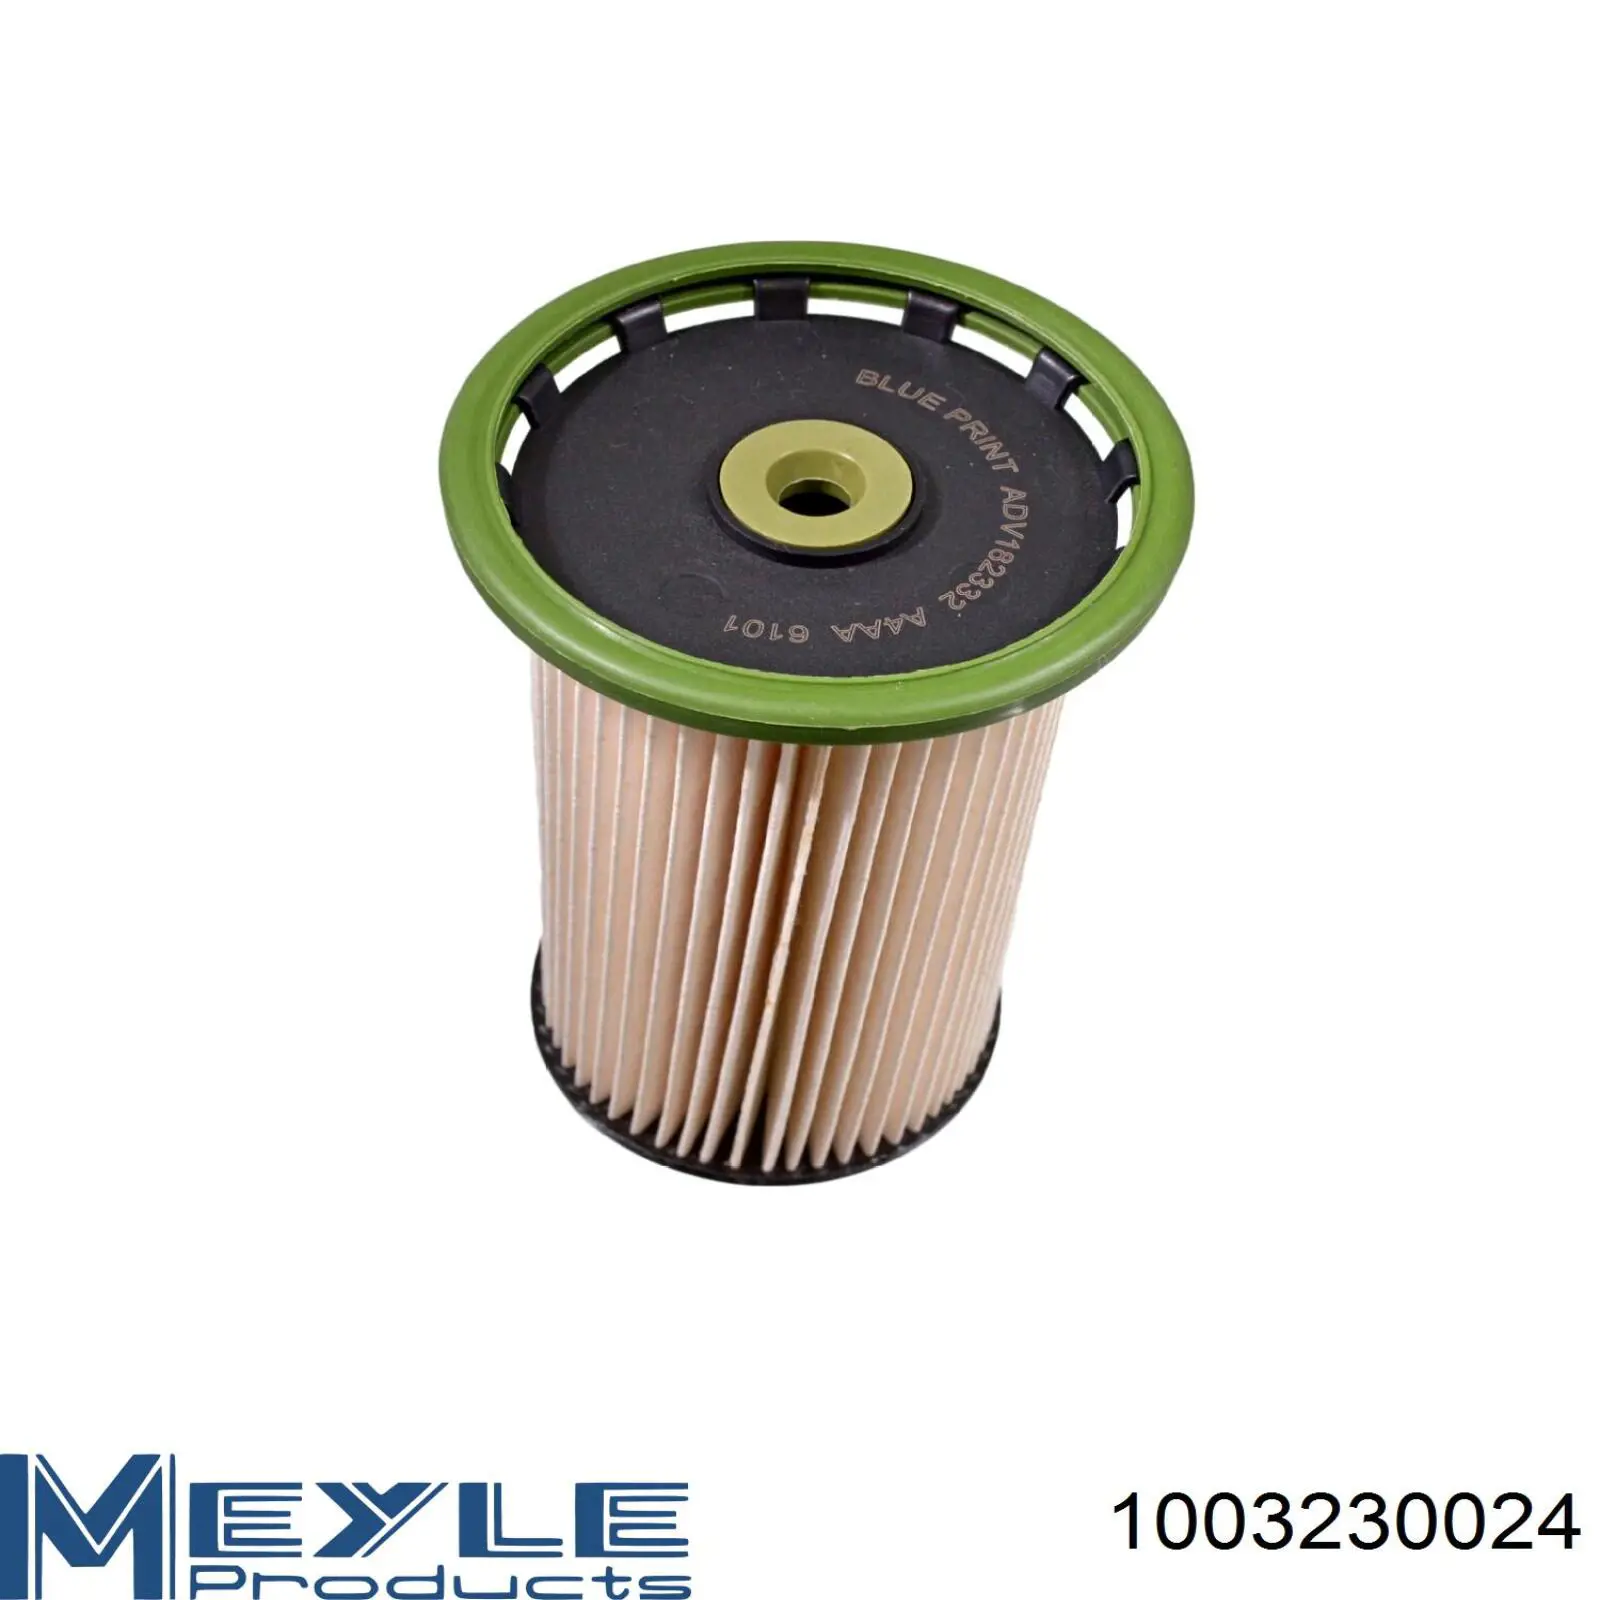 1003230024 Meyle filtro combustible